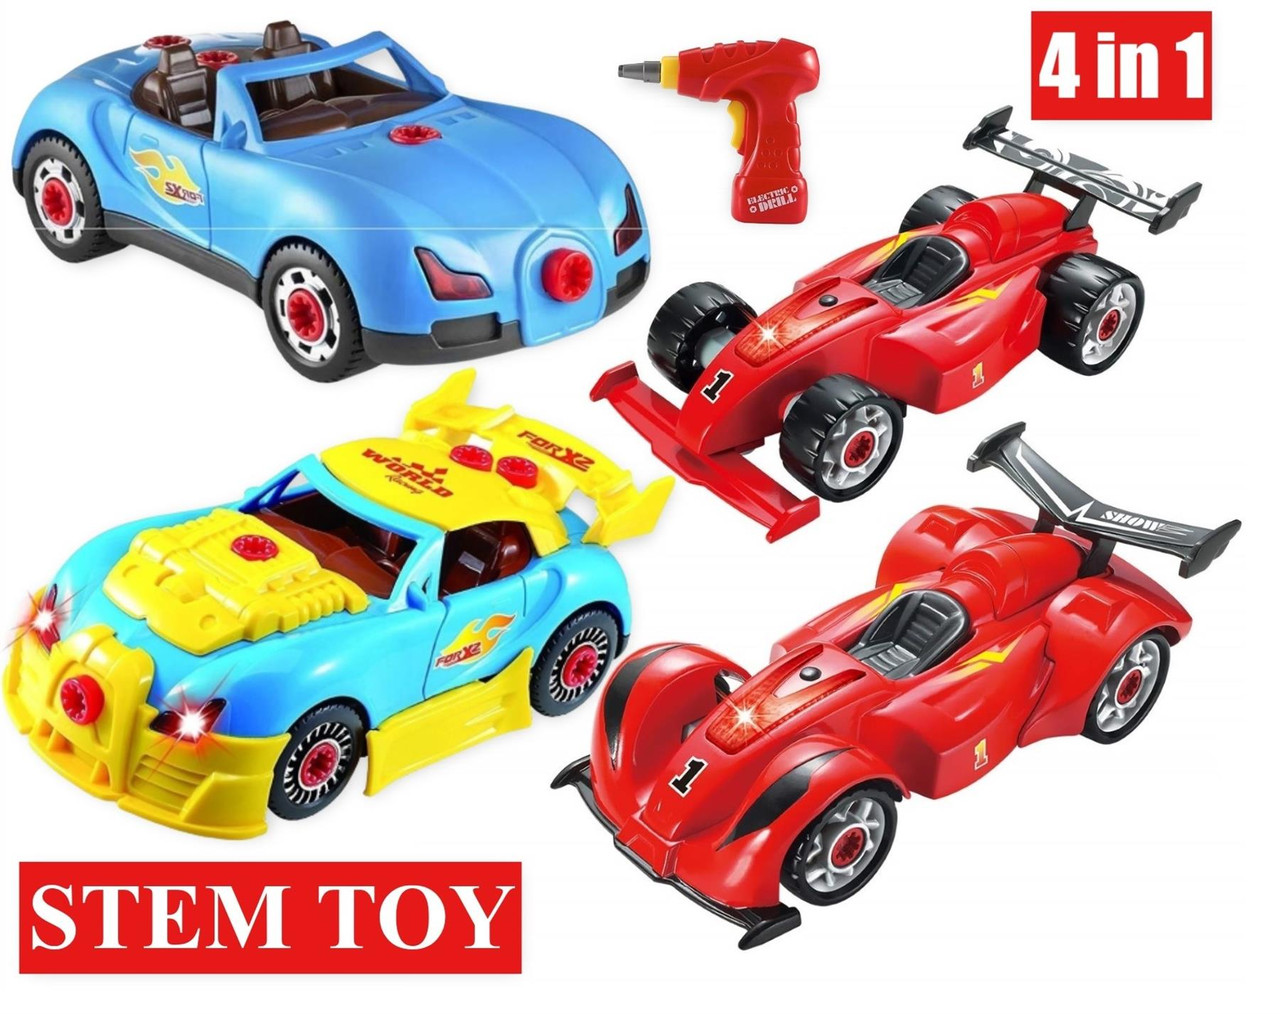 build your own racing car toy